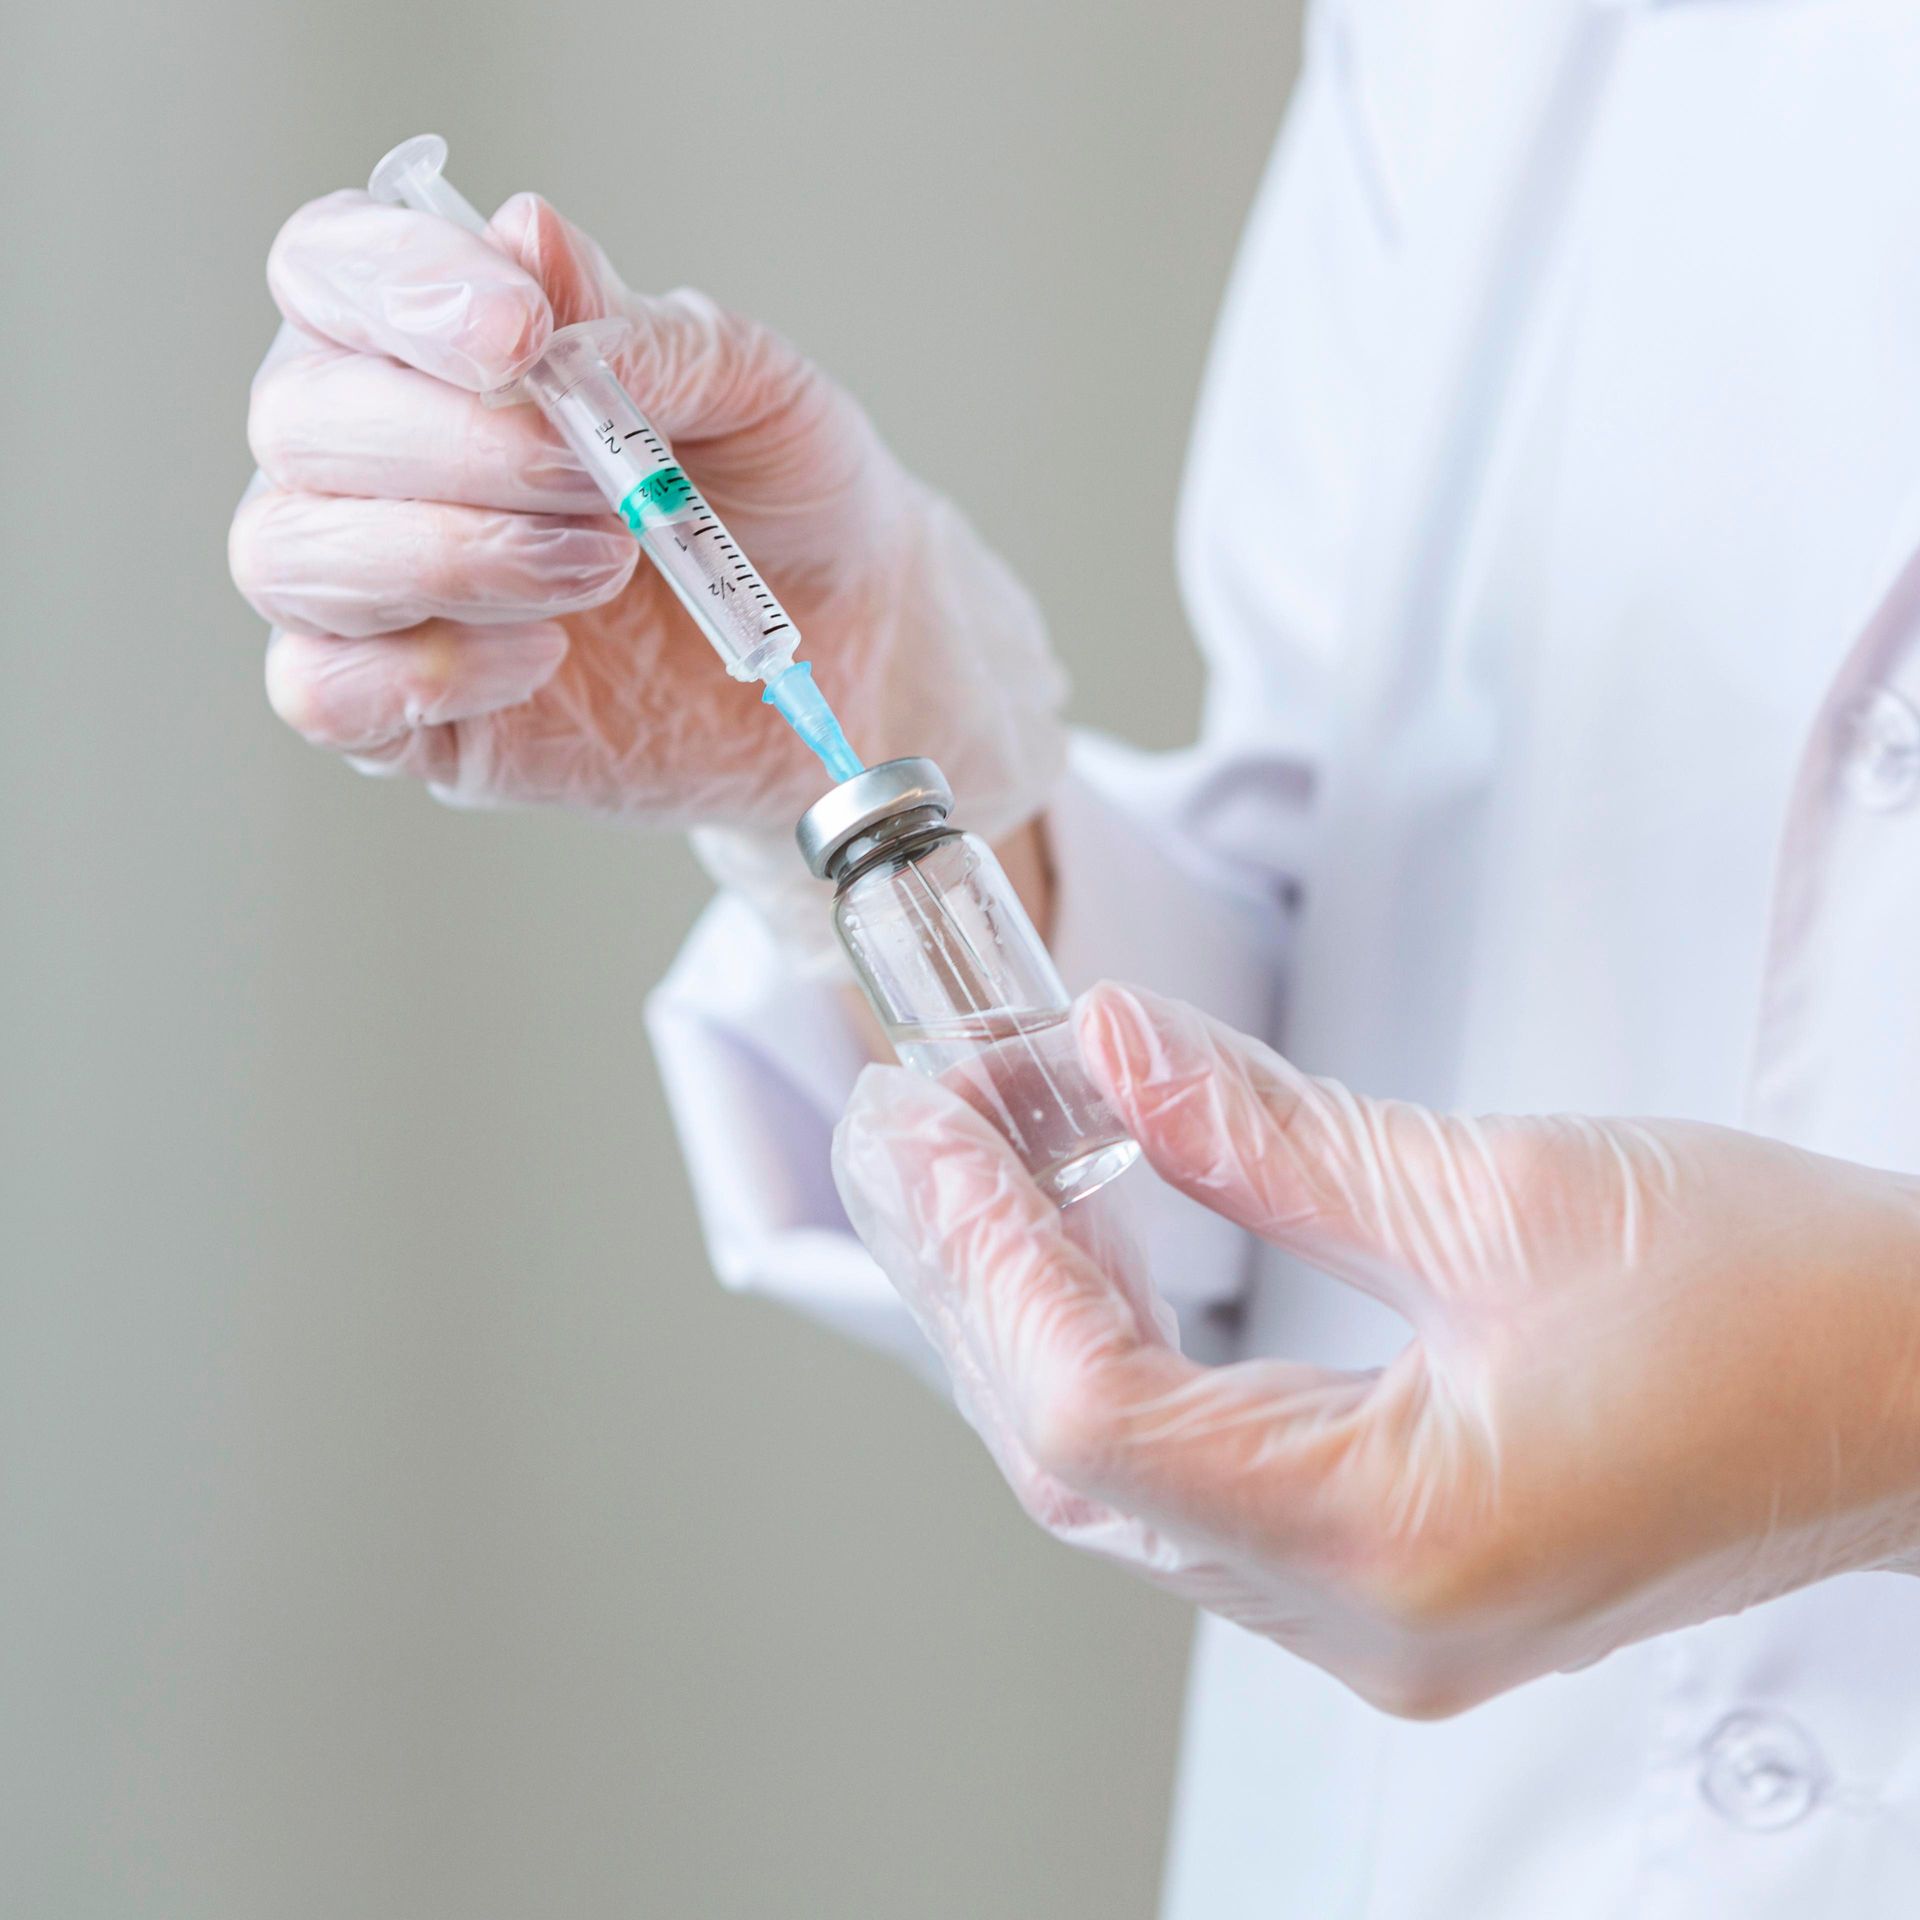 a person is holding a syringe and a bottle of liquid